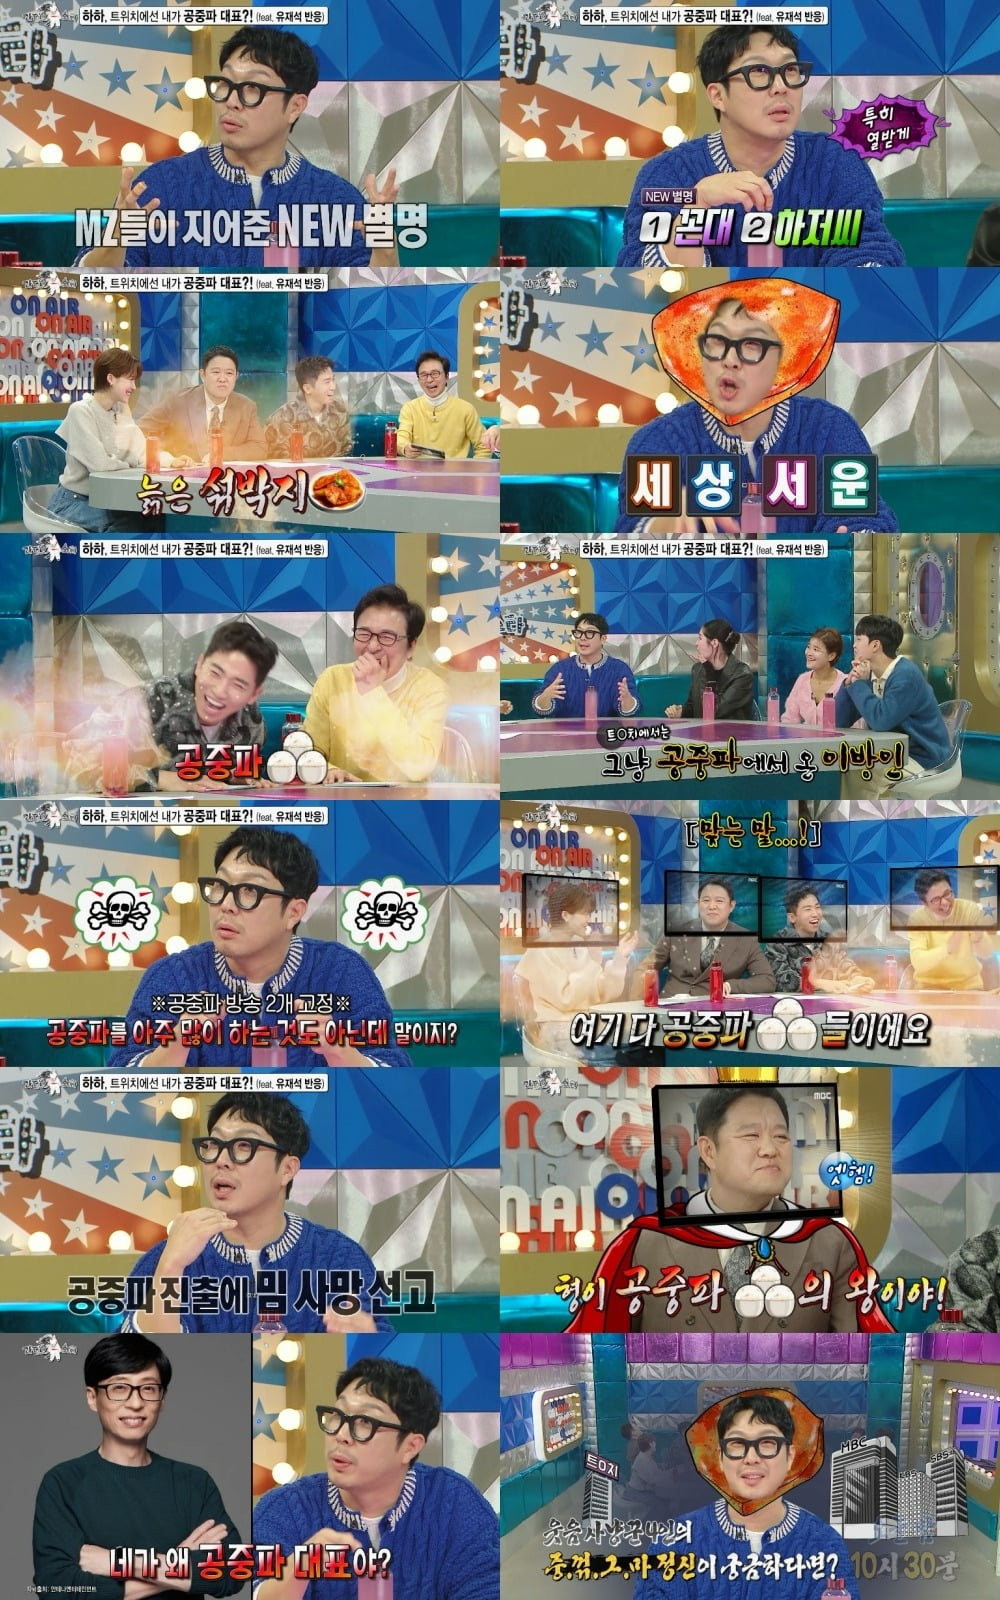 Haha, saddened by Yoo Jae-seok's comment, "I can't be recognized anywhere."